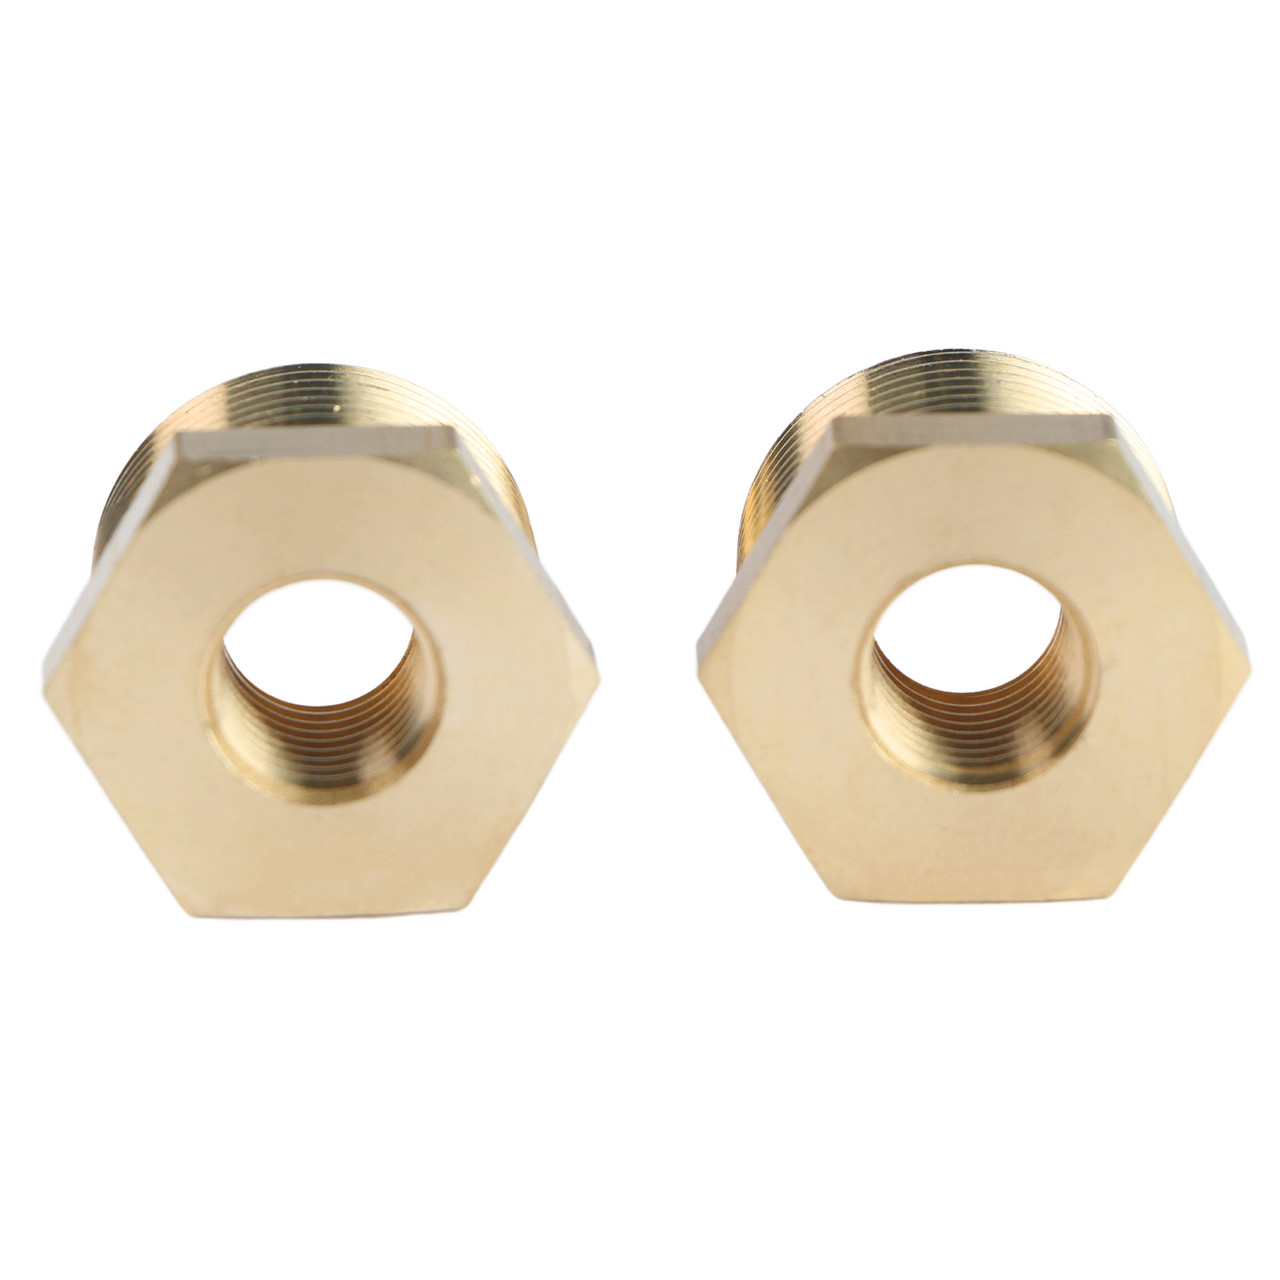 U.S. Solid 2pcs Brass Pipe Fitting, Adapter, 1/4 Male Pipe x 3/8 Female  Pipe